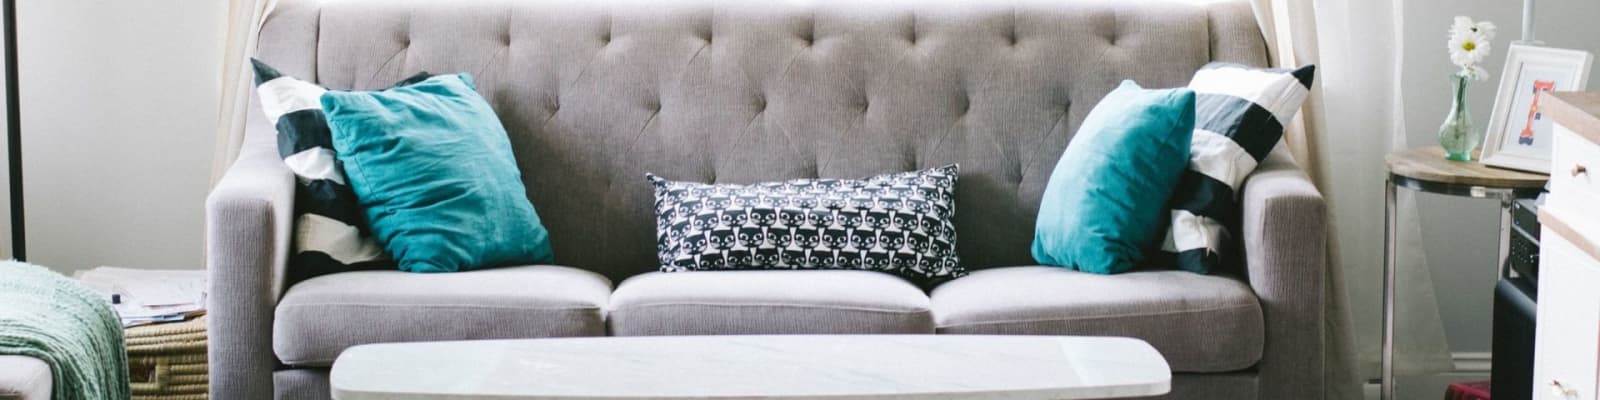 upholstery cleaning pros in Phoenix